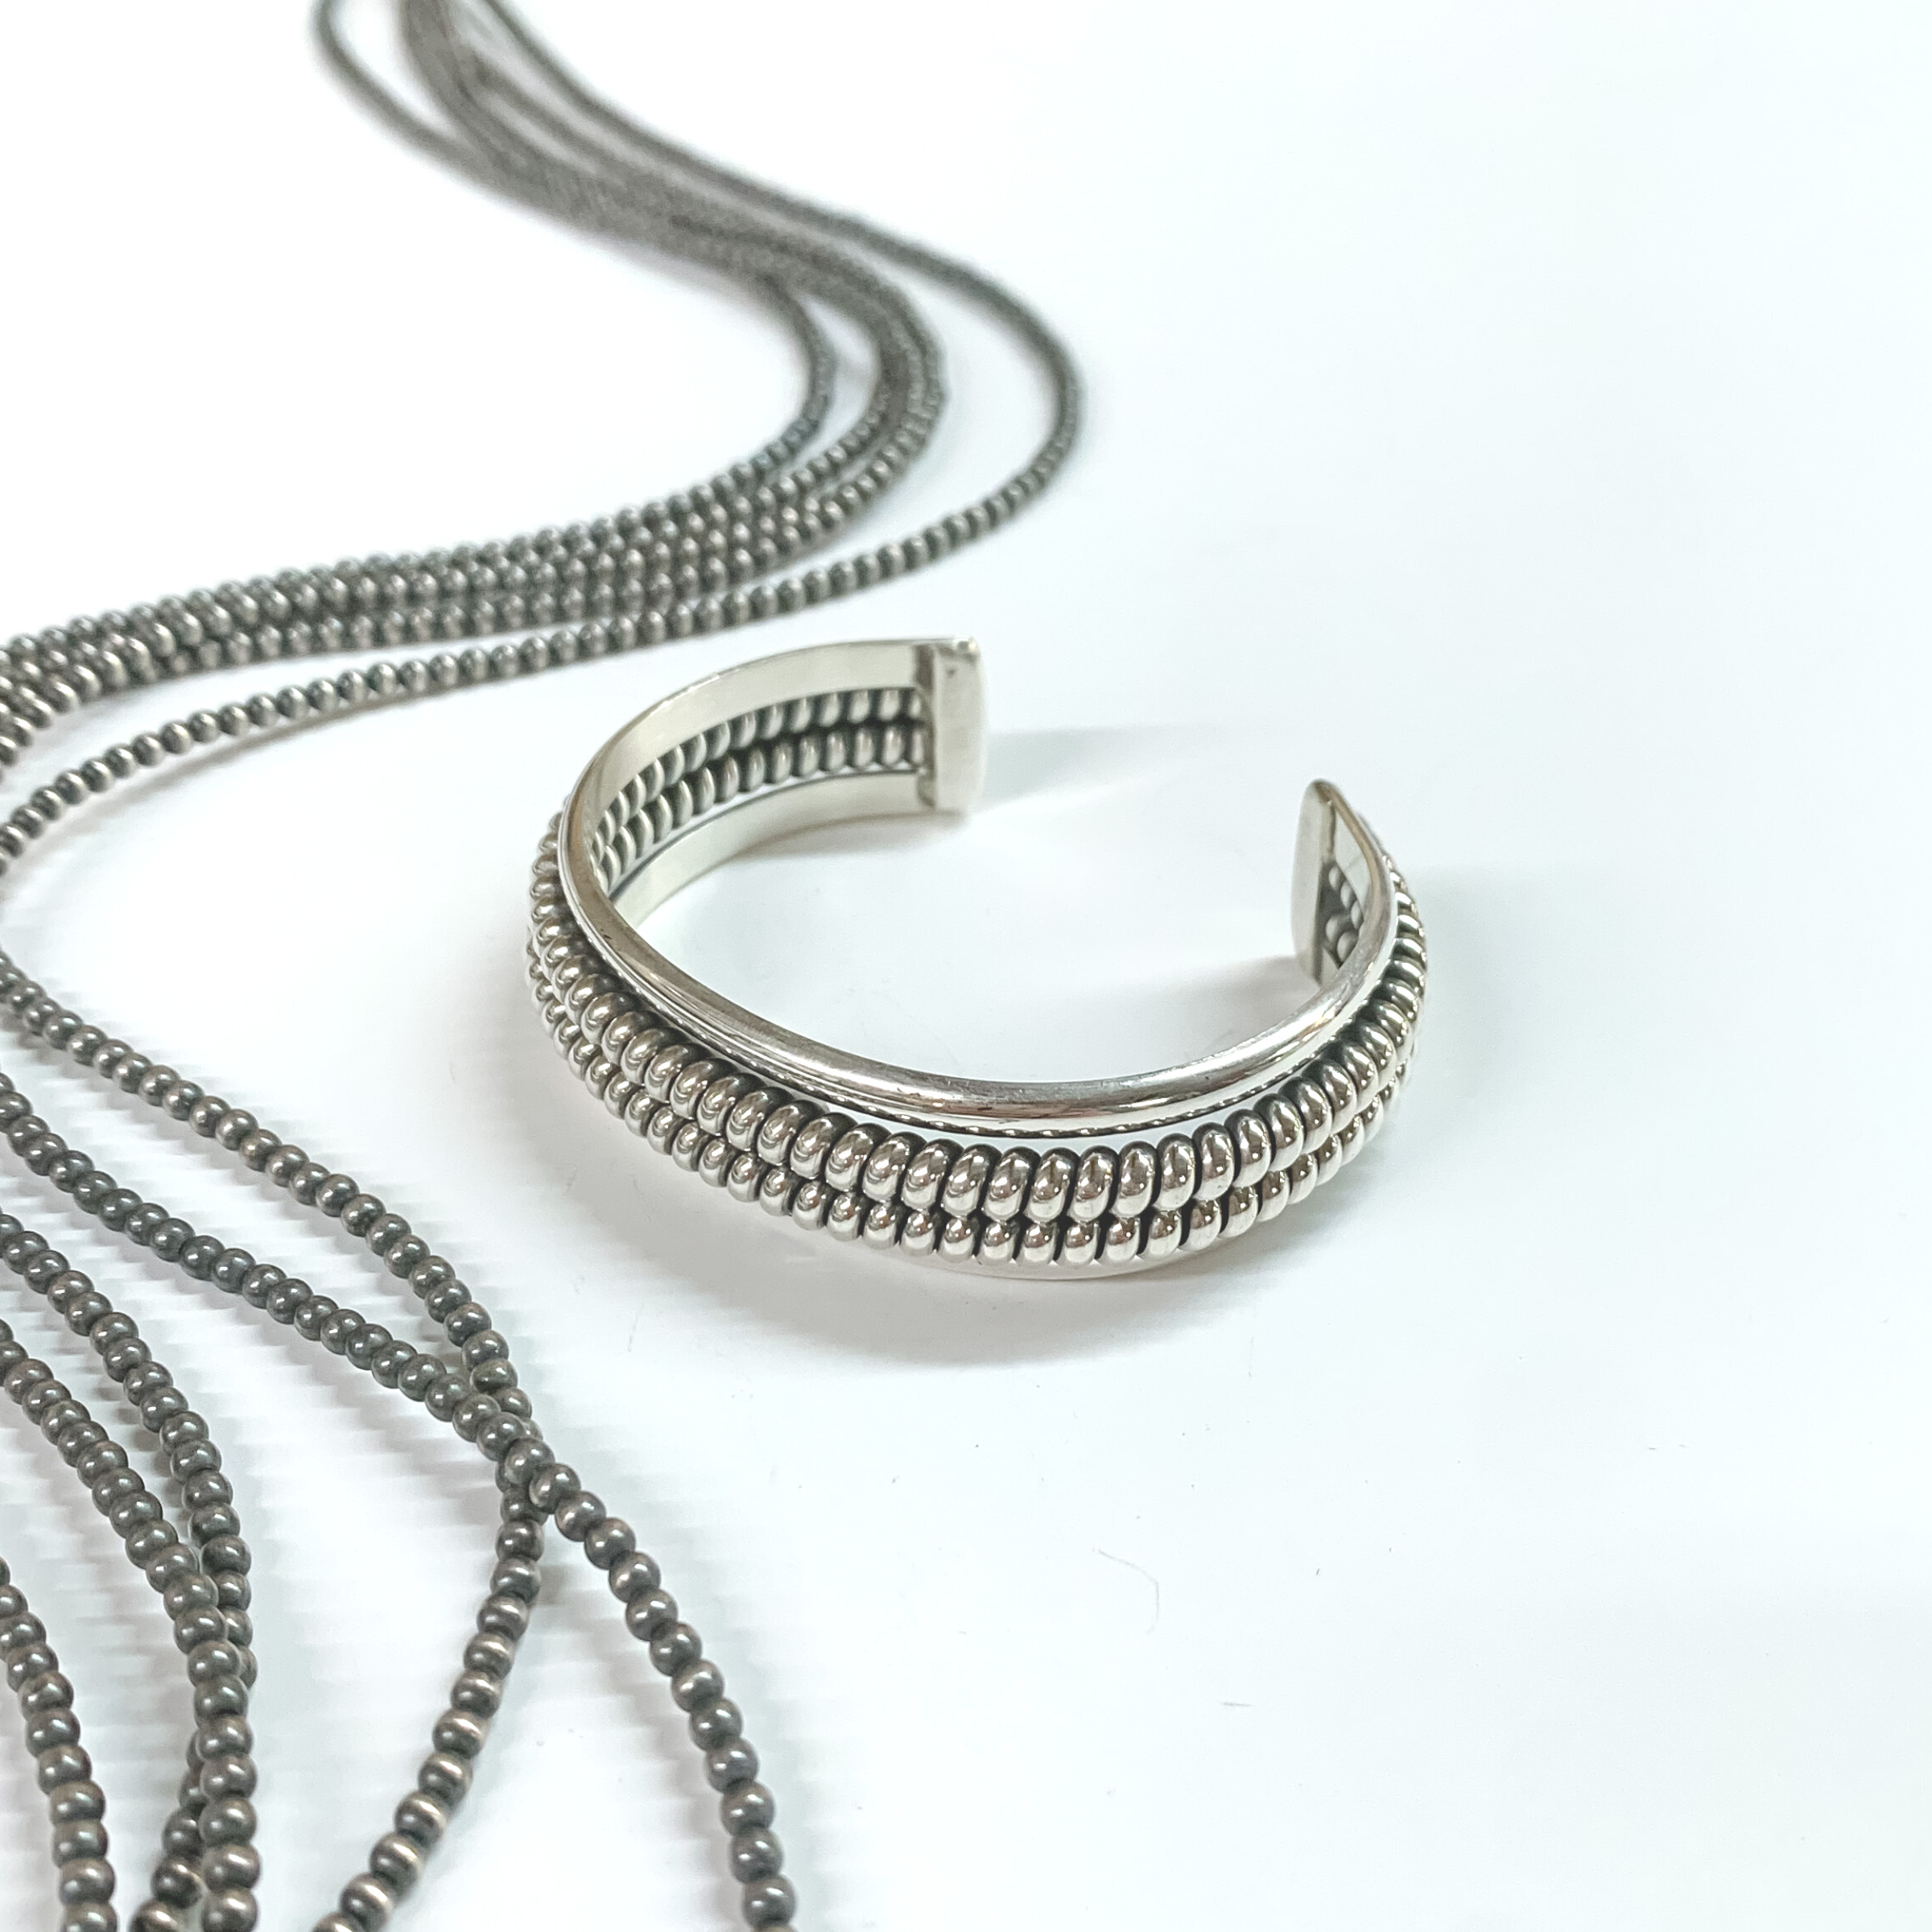 Silver cuff bracelet with a rope design. The rope design has two layers. This bracelet is pictured on a white background with silver beads on the left side. 